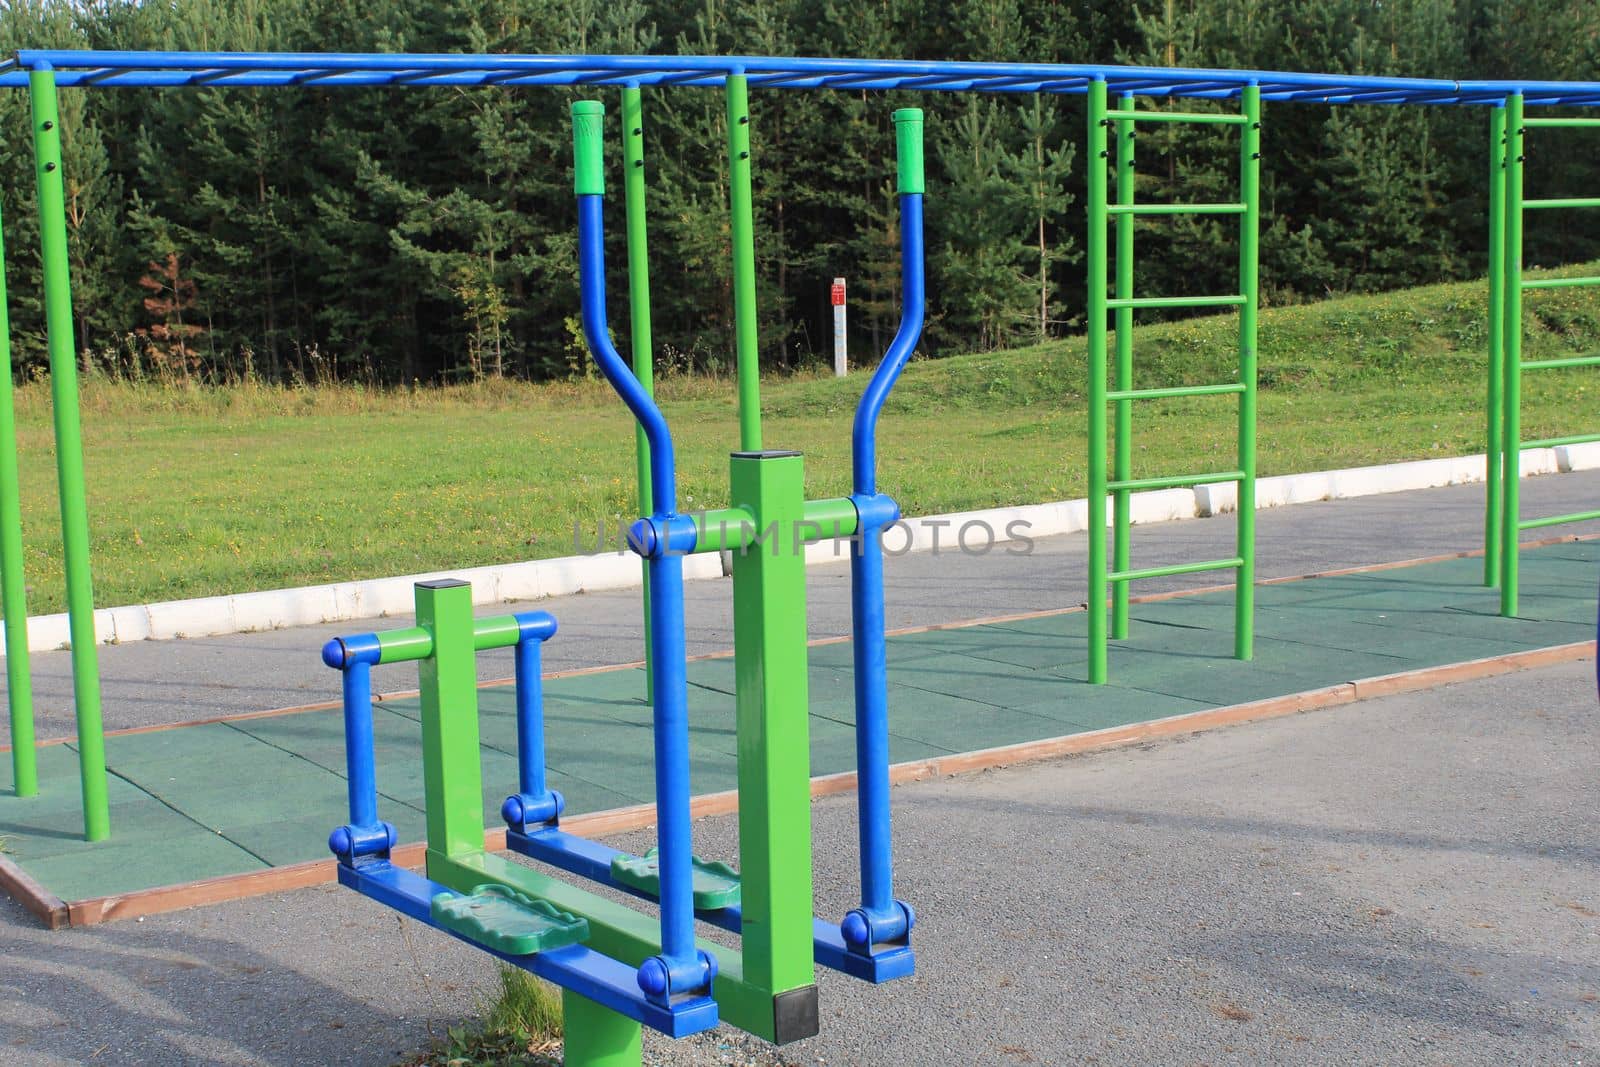 Sports outdoor simulator in a training camp. The concept of a healthy lifestyle